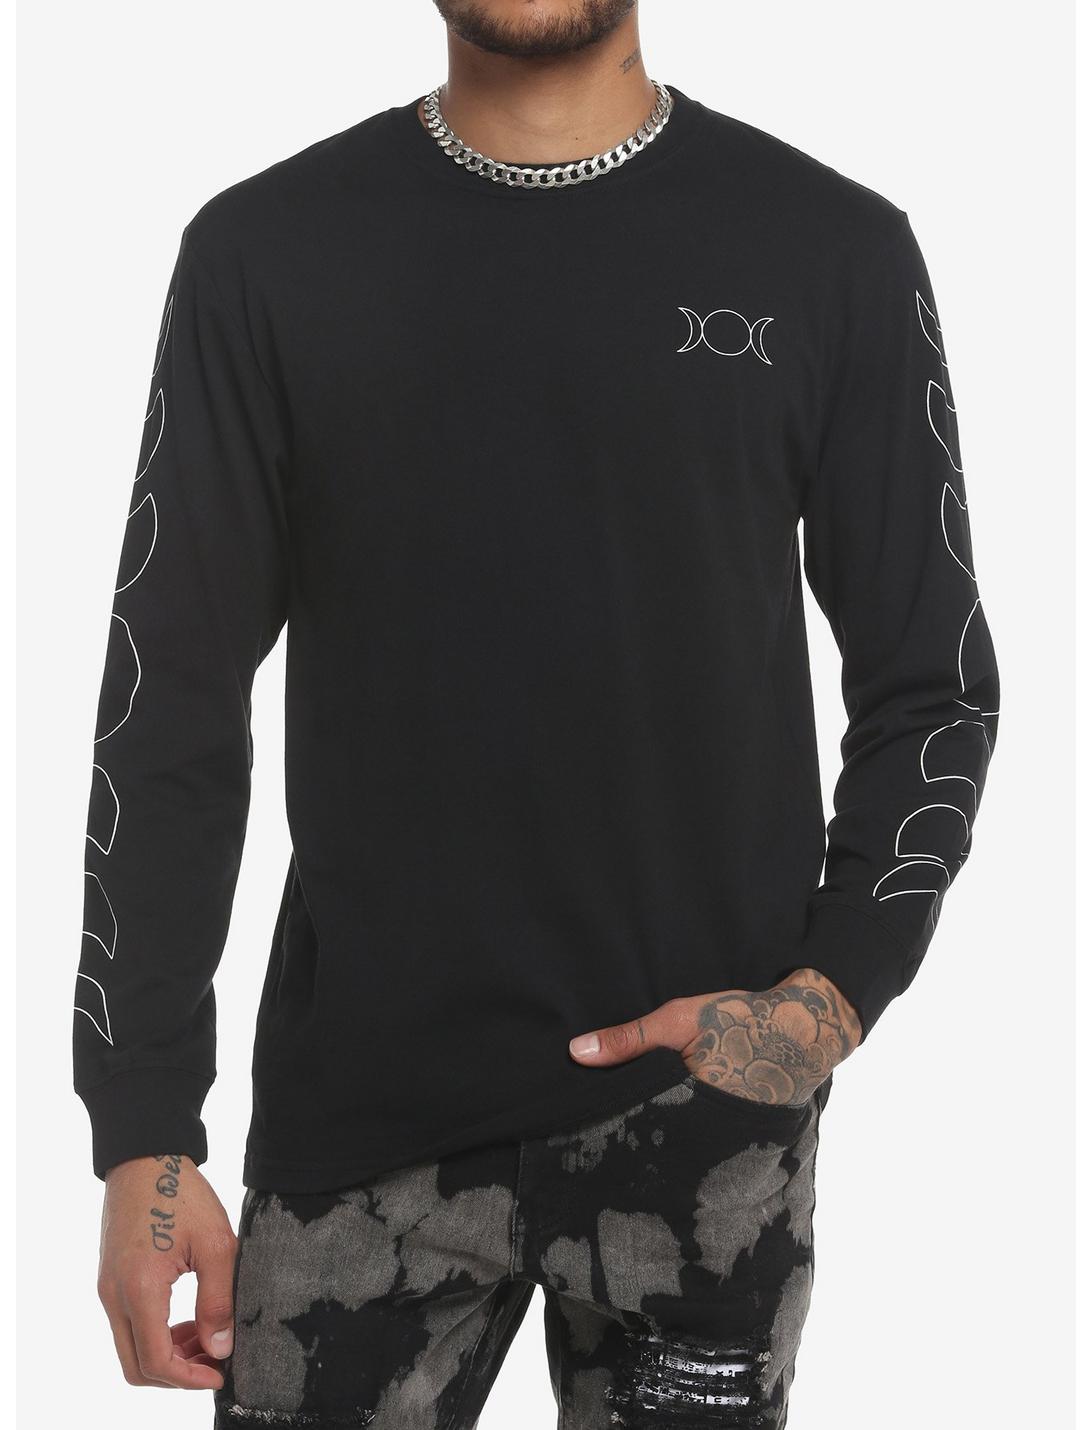 Moon Phases Outline Long-Sleeve T-Shirt, BLACK, hi-res